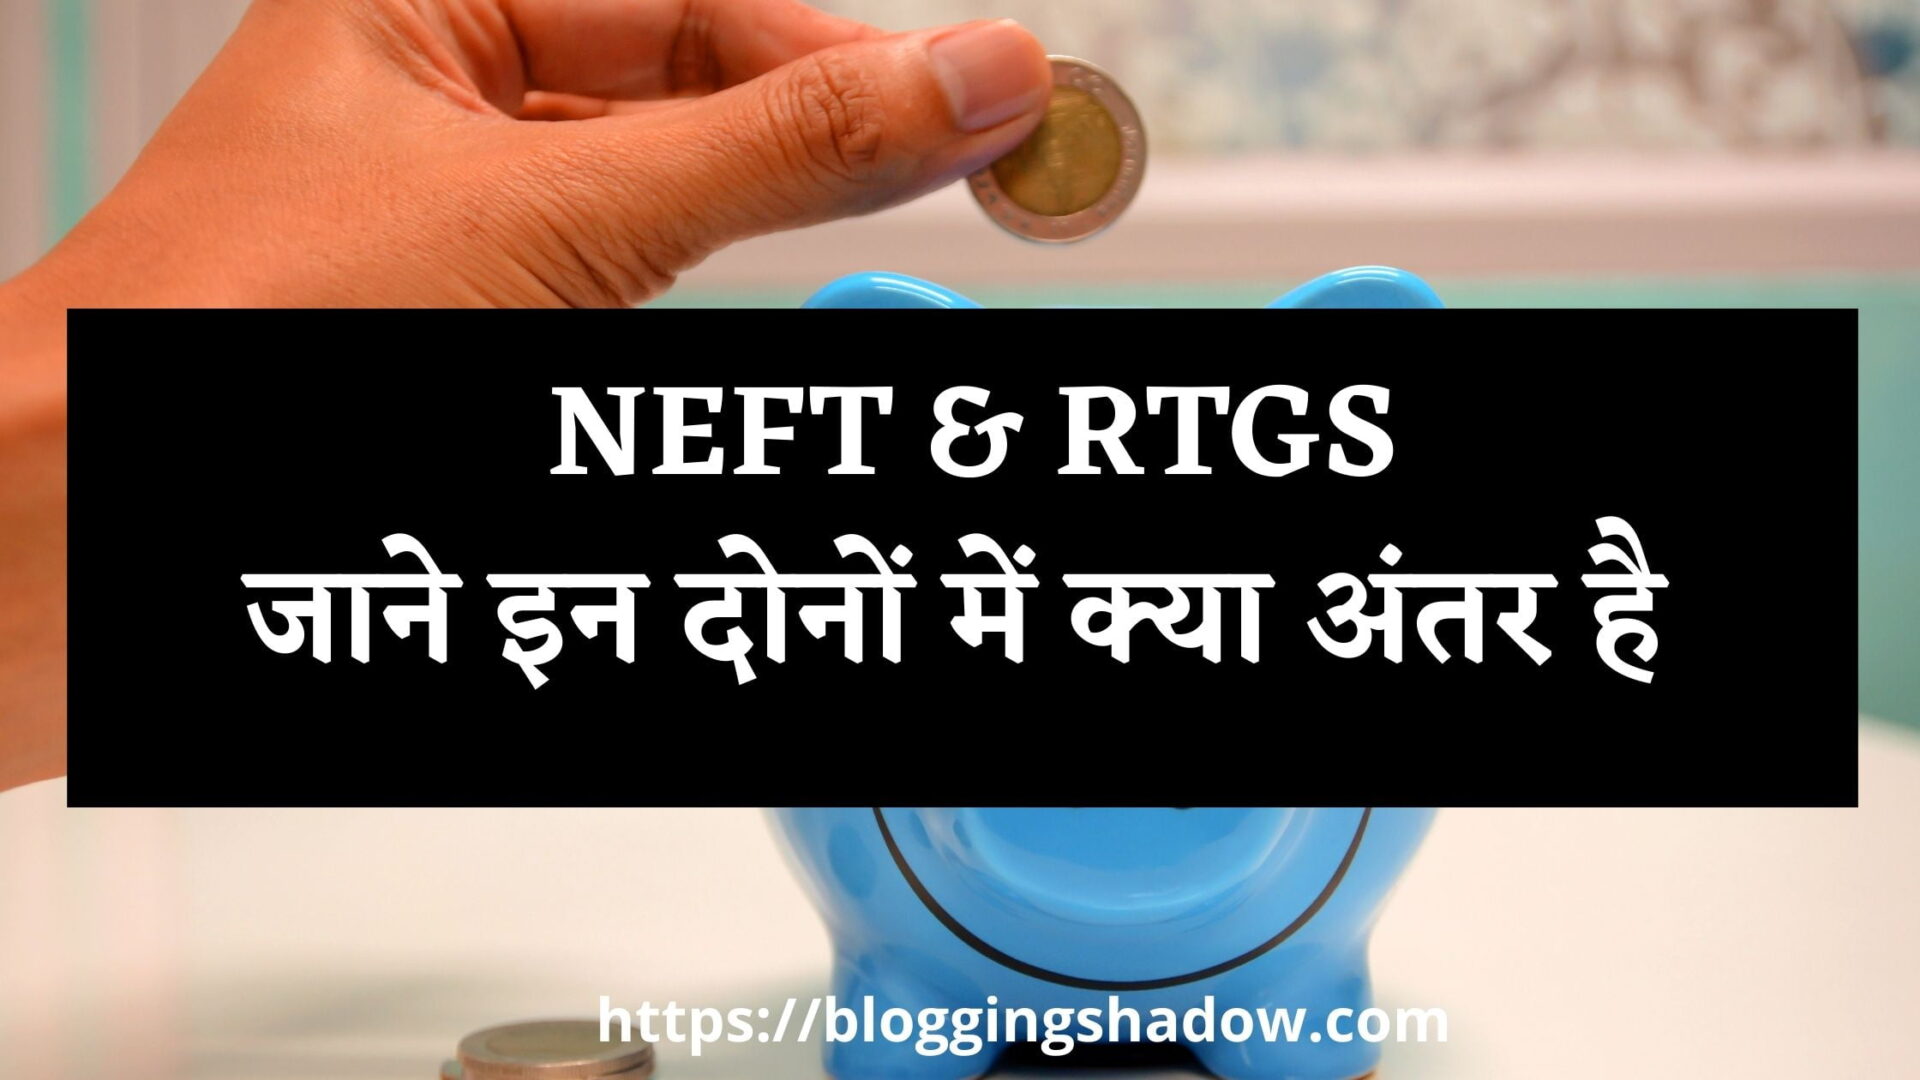 RTGS and NEFT meaning in Hindi